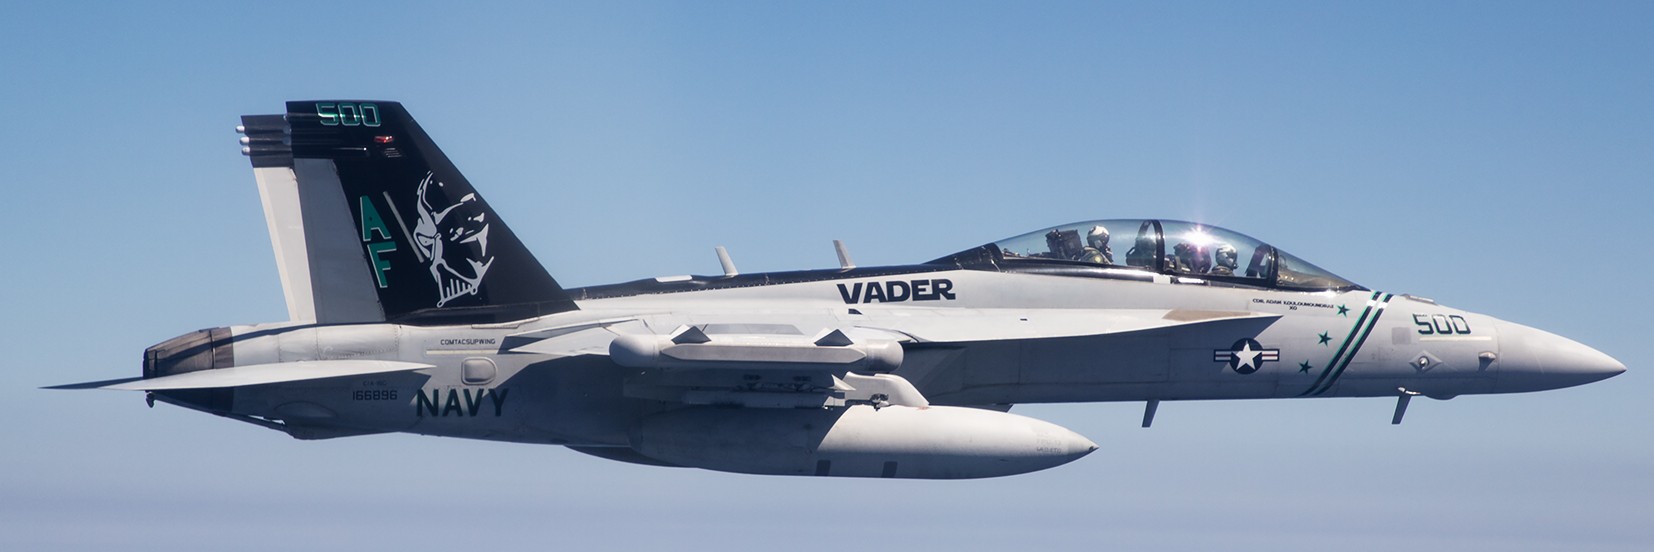 vaq-209 star warriors electronic attack squadron ea-18g growler us navy point mugu missile test range 105